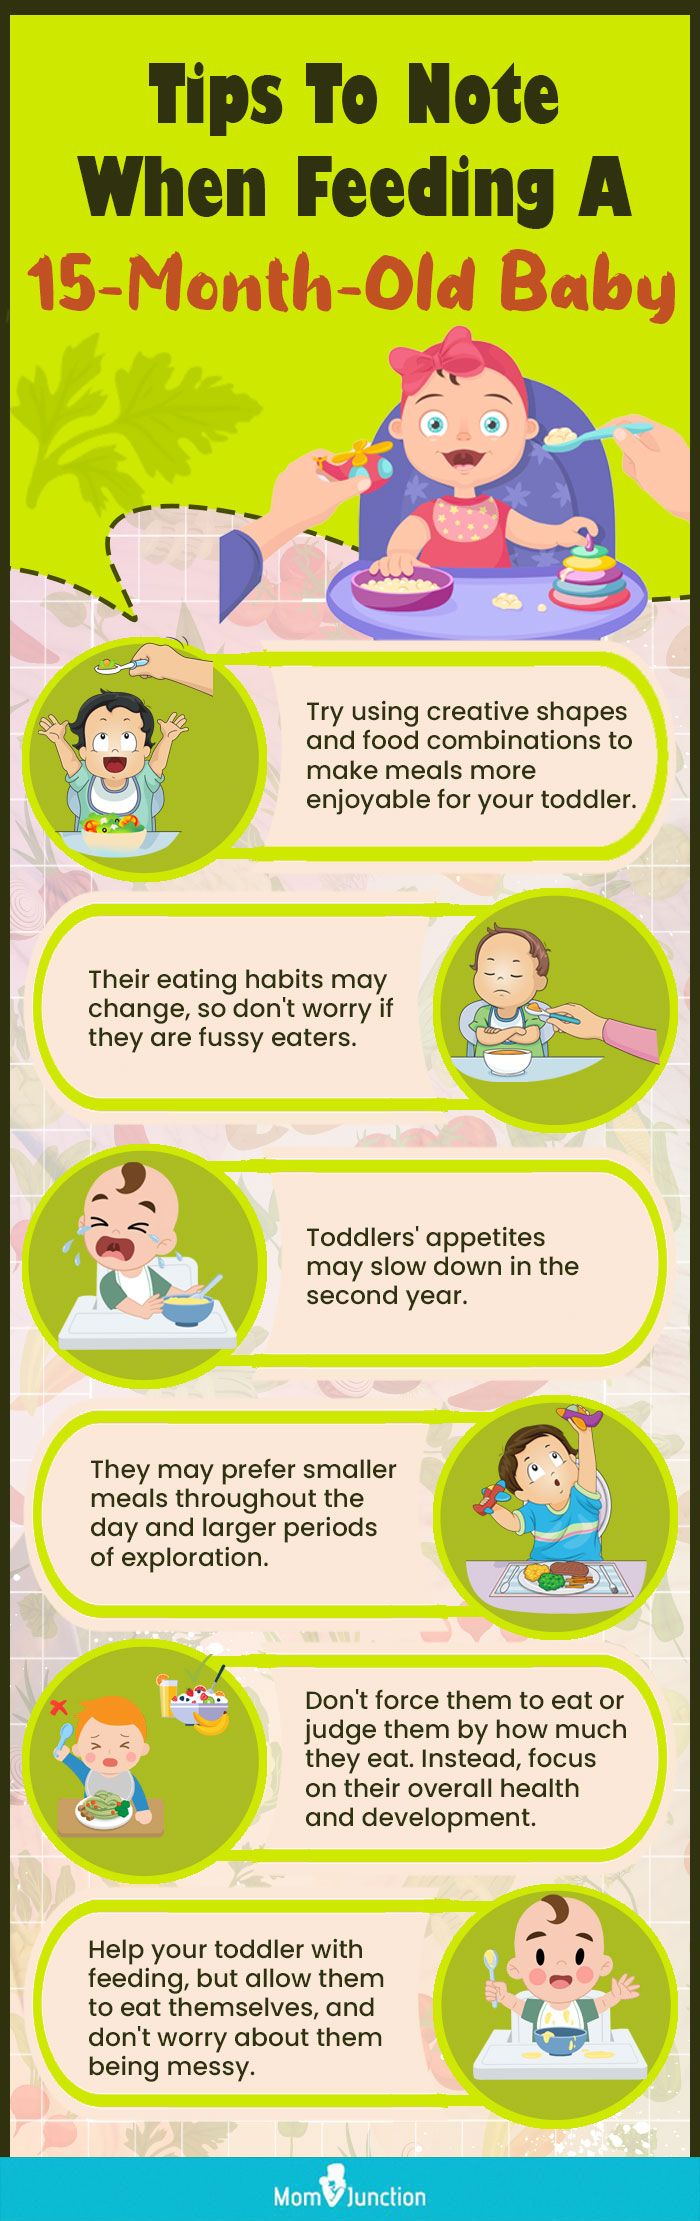 tips to note when feeding a 15 month old baby (infographic)